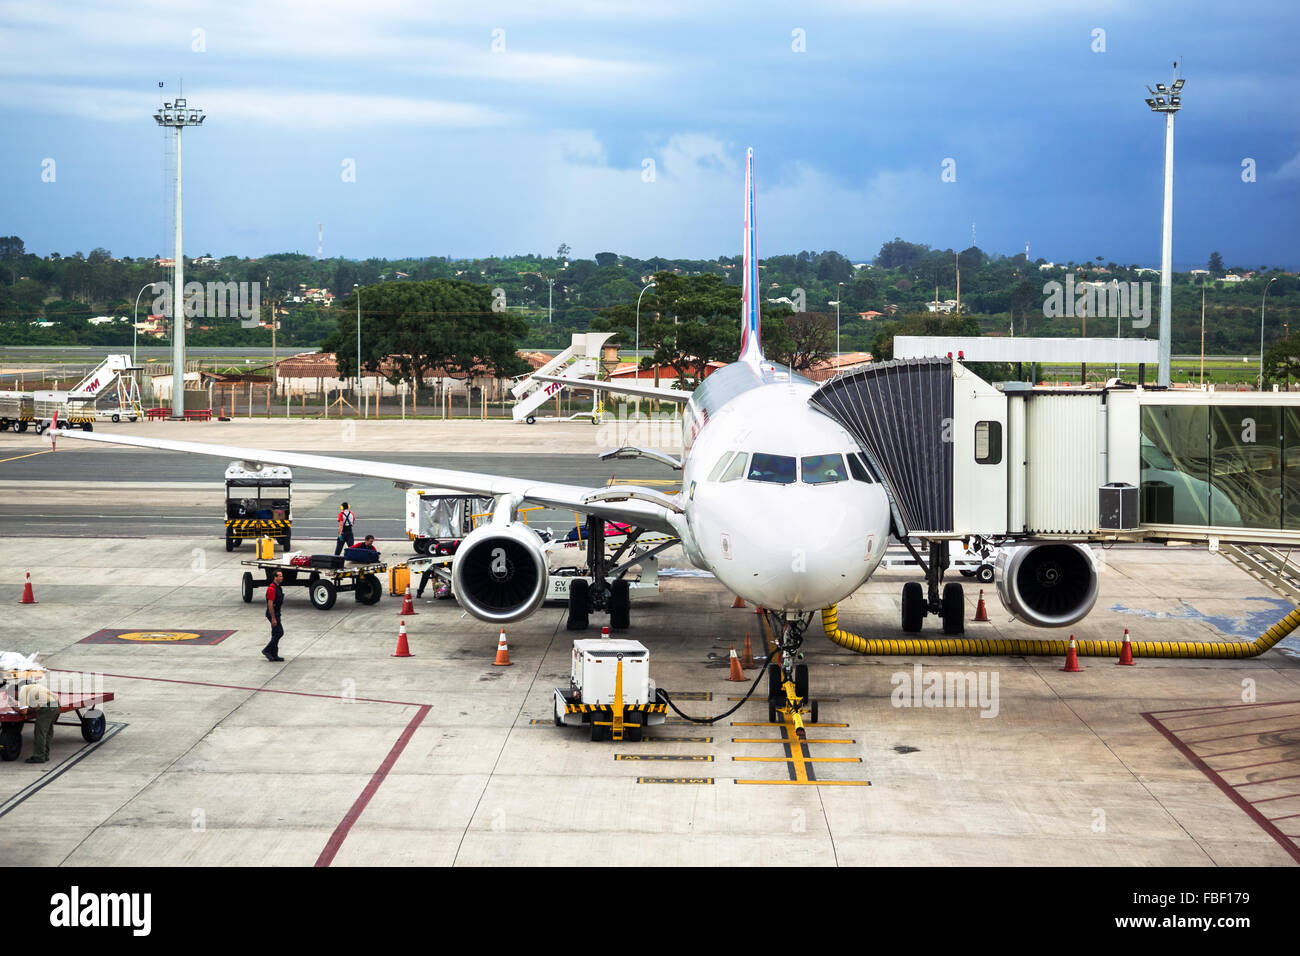 Airplane parked at airport in Brasilia, capital of Brazil. Stock Photo